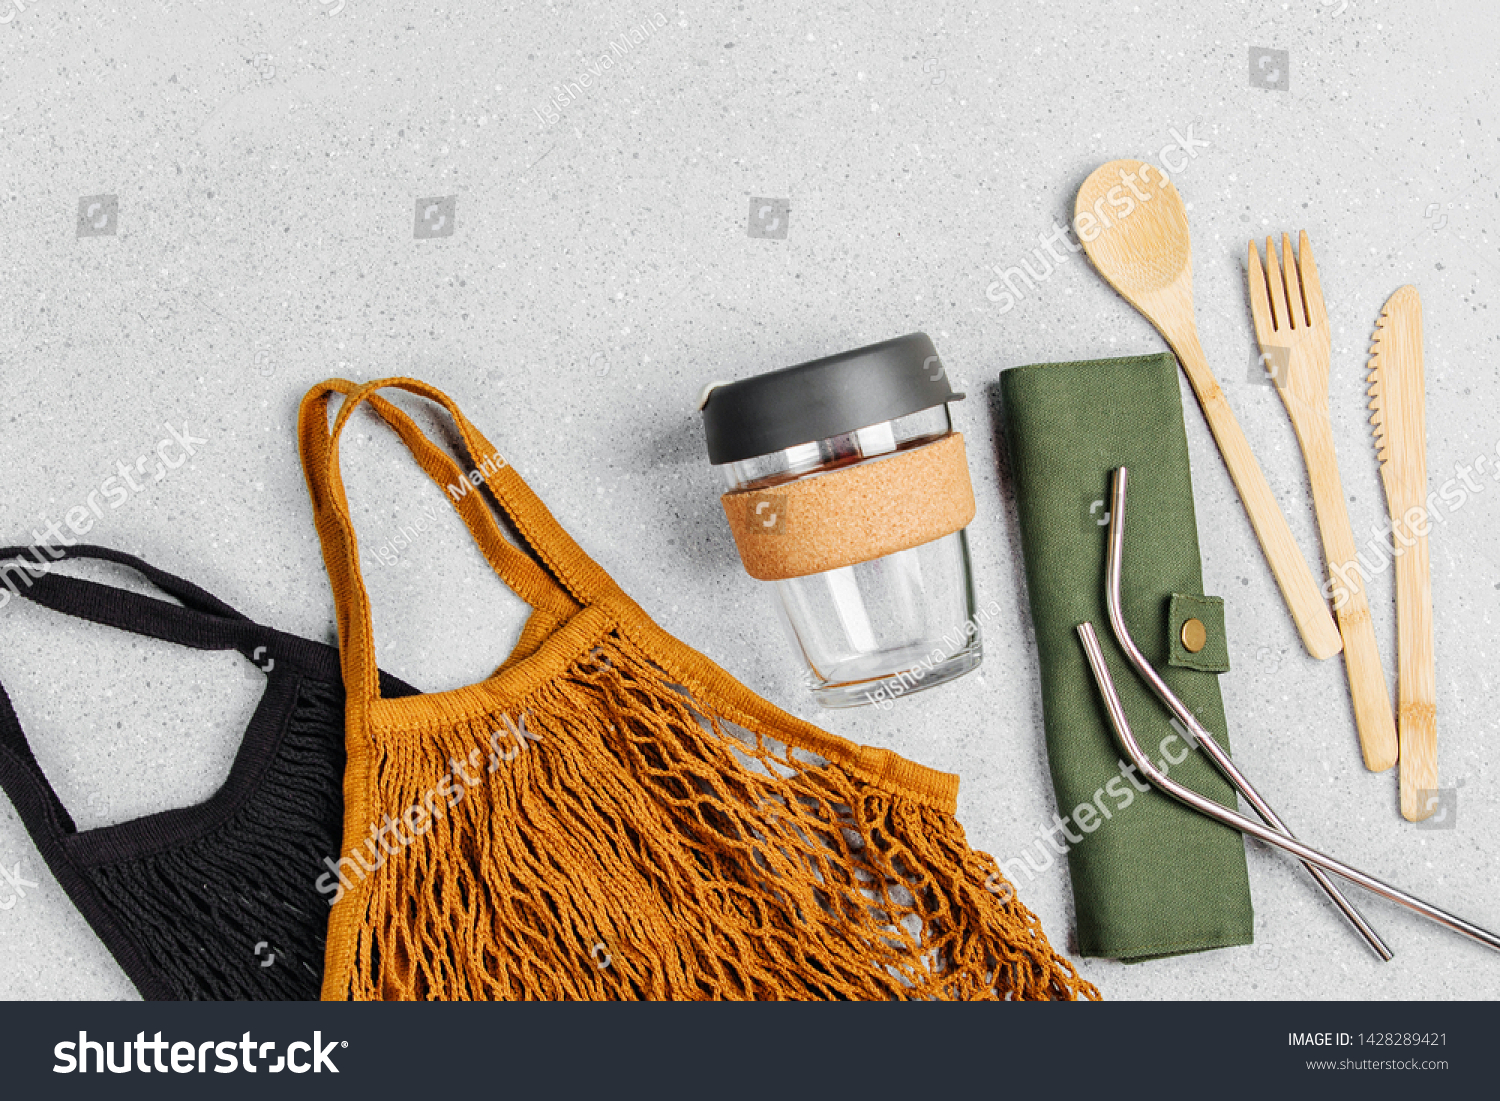 Set of Eco friendly bamboo cutlery, eco bag and reusable coffee mug. Sustainable lifestyle. Plastic free concept. #1428289421